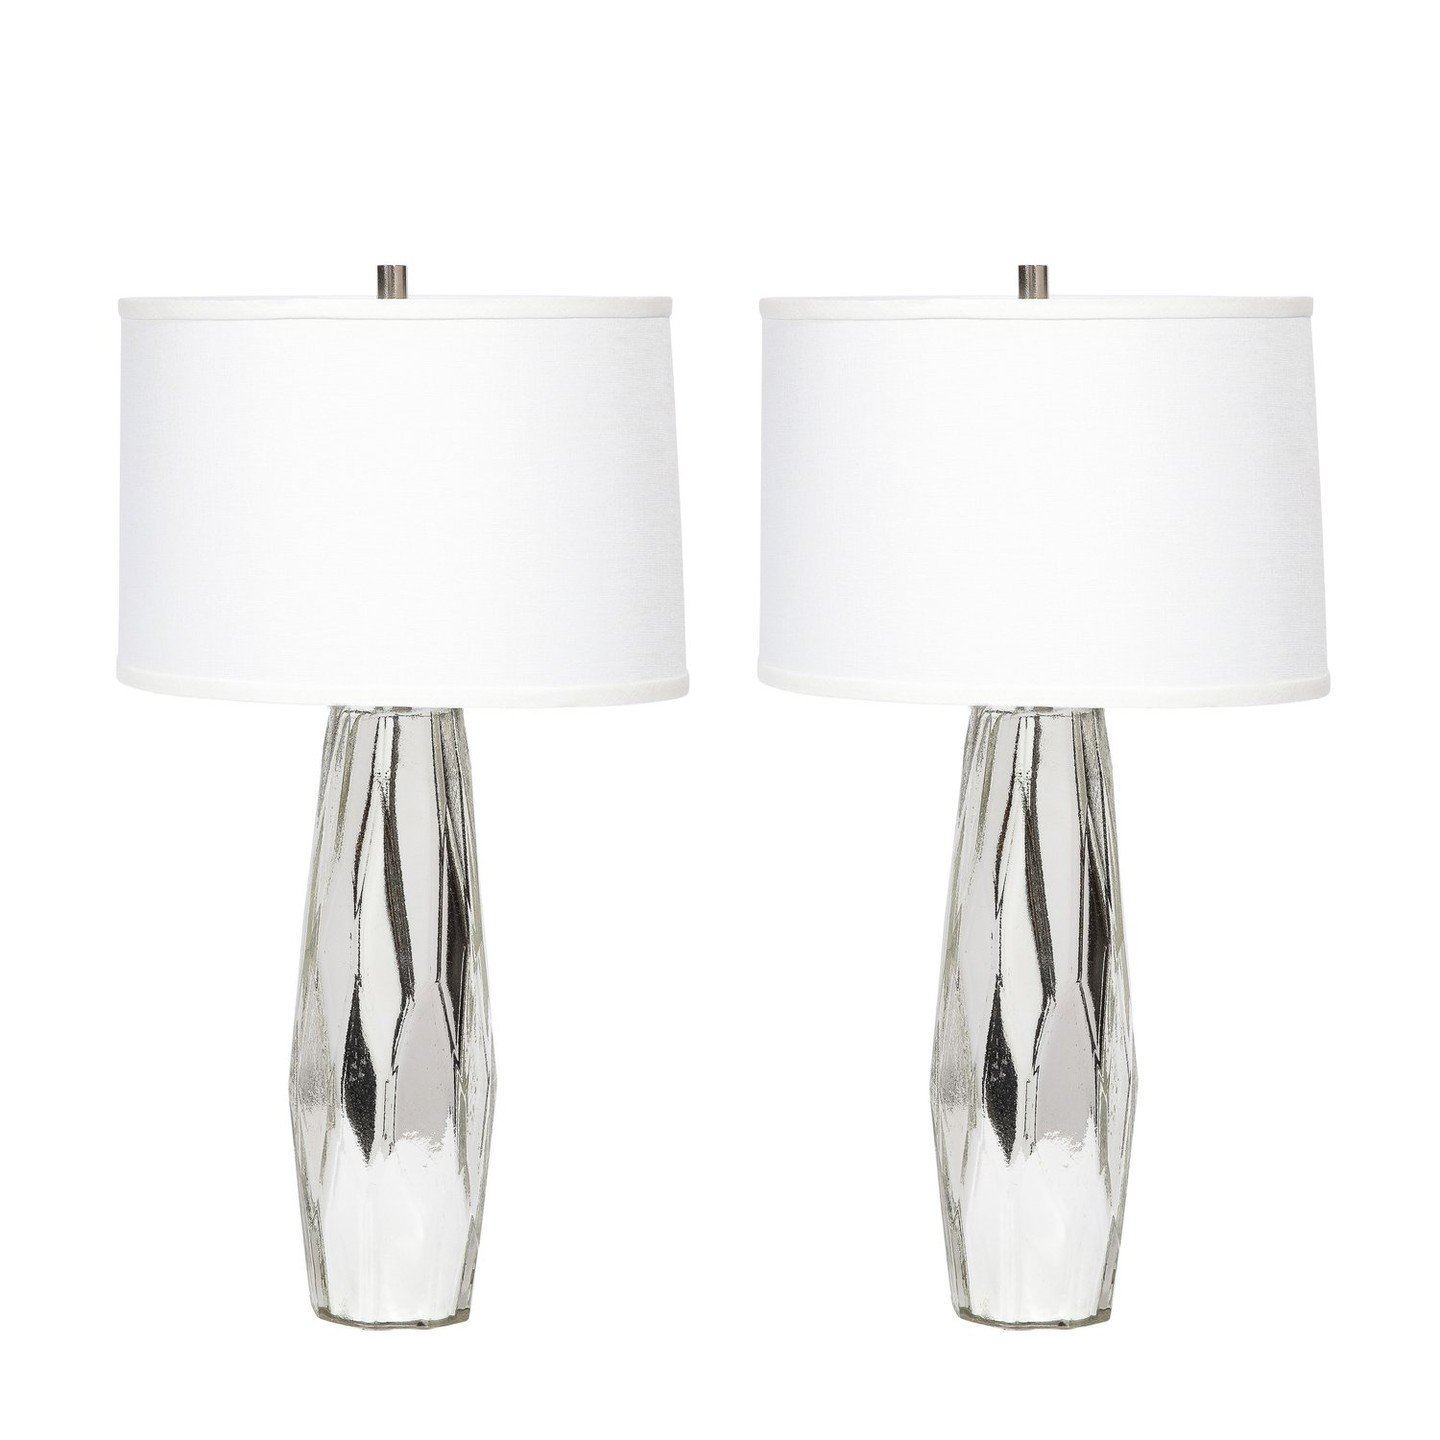 Modernist Hand-Blown Murano Cubist White Gold Mercury Glass Lamps

This stunning pair of table lamps were handblown in Murano, Italy- the island off the coast of Venice renowned for centuries for its superlative glass production. They feature sculptu